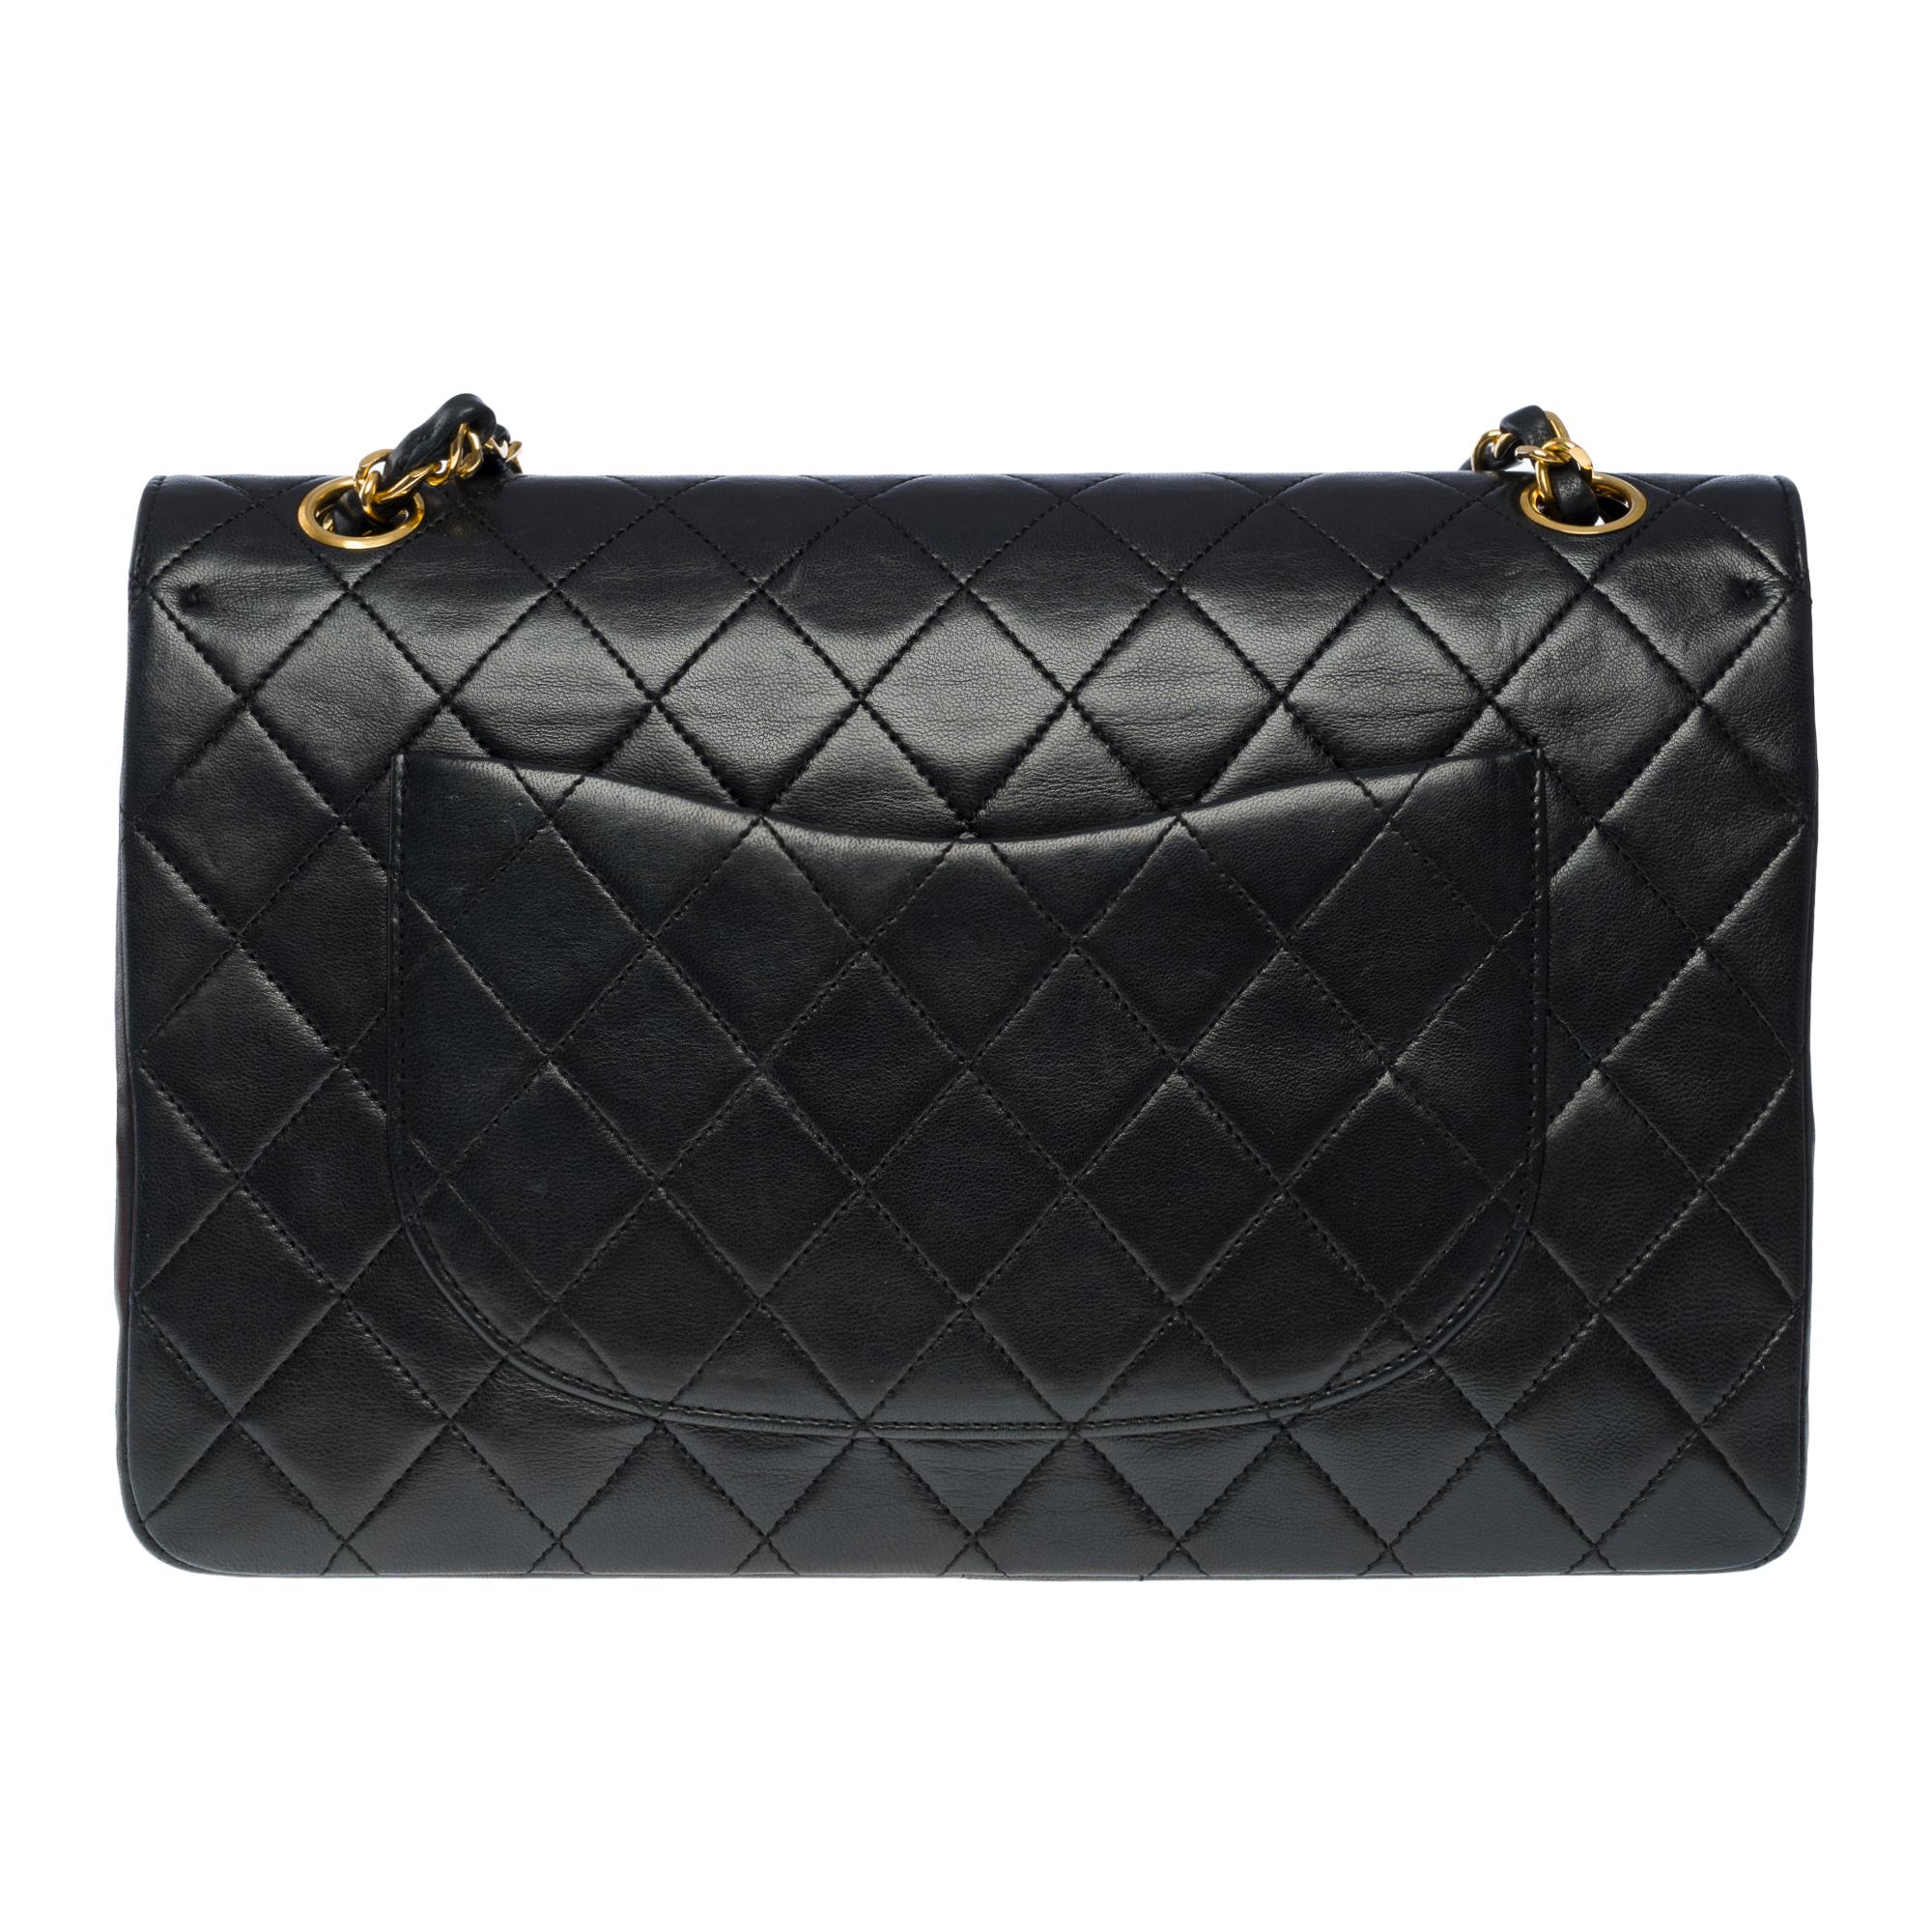 Women's Chanel Timeless/Classic double flap shoulder bag in black quilted lambskin , GHW